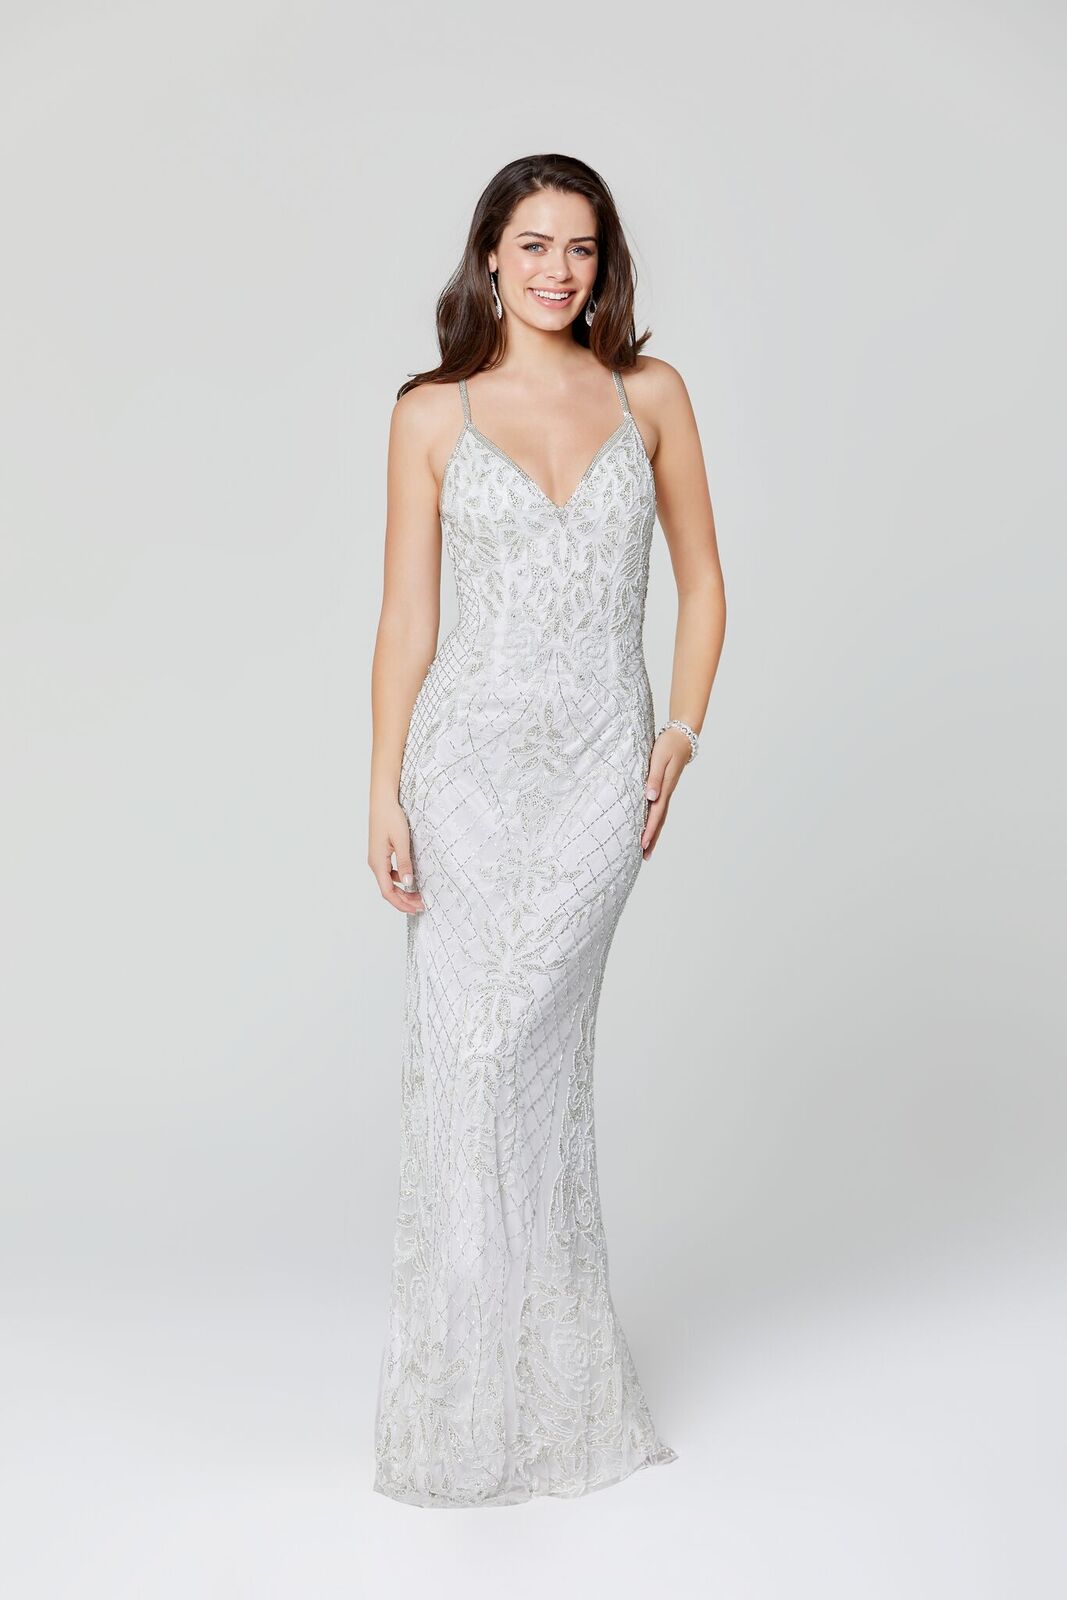 Primavera Couture 3428 is a beaded Prom Dress, Pageant Gown, Wedding Dress & Formal Evening Wear gown. This Gown Features a v neckline with spaghetti straps that criss cross in the open back full long sequin and bead skirt. 